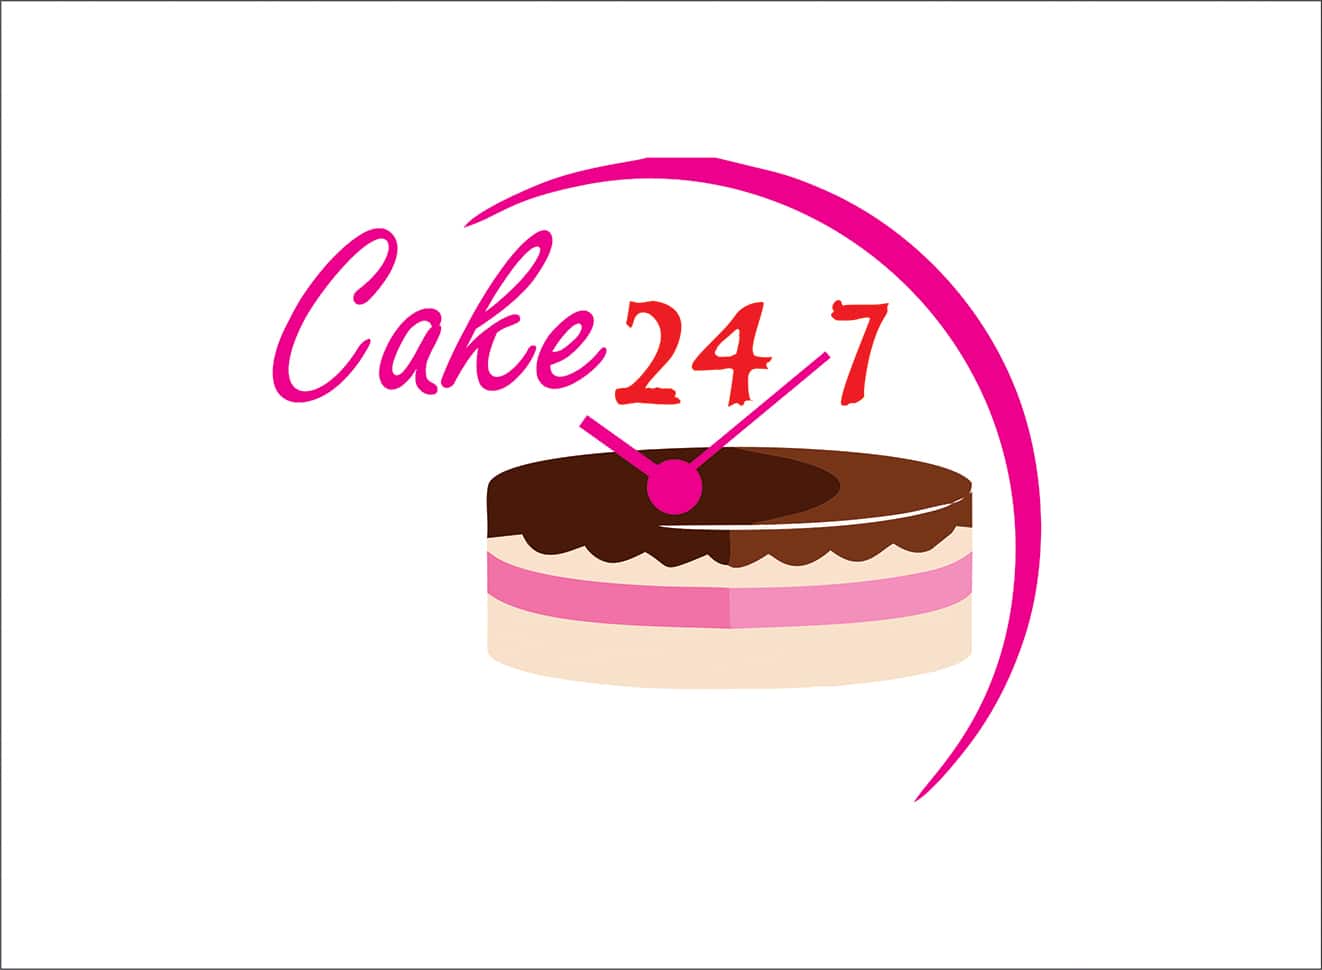 Classic Red Velvet Cake, 24x7 Home delivery of Cake in Gurgaon Sector-40,  Gurgaon